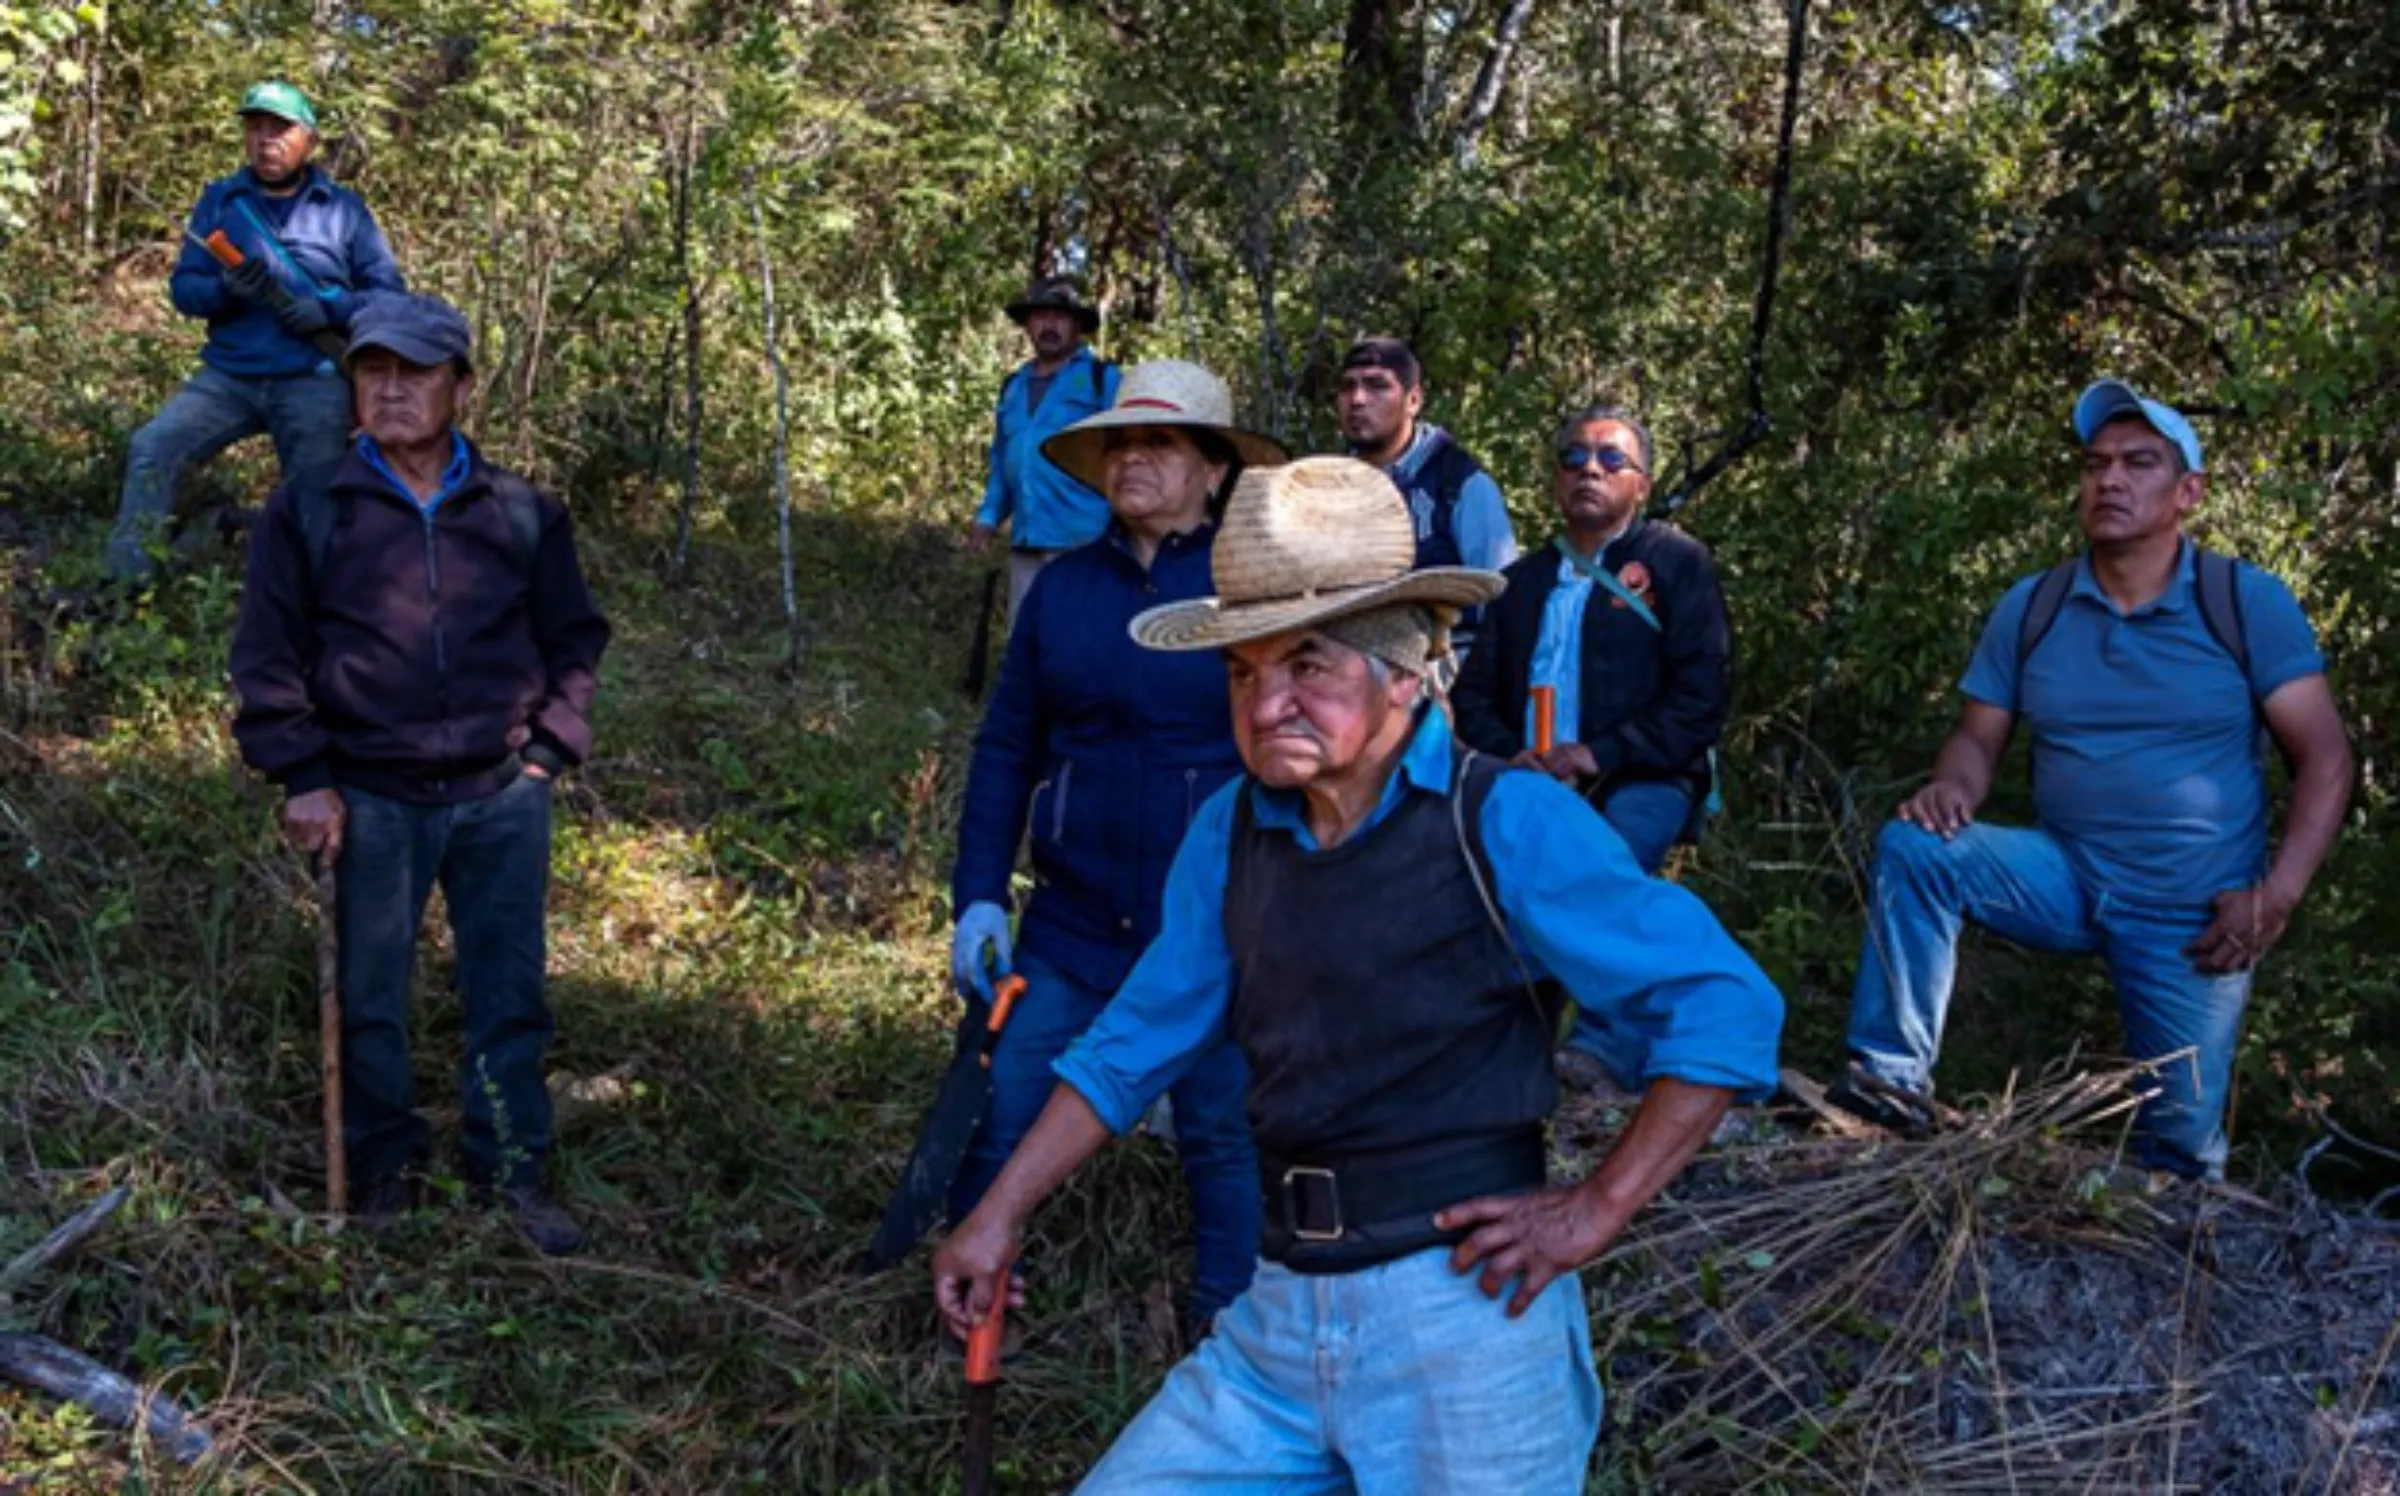 Men rest after a collective work of clearing the forest near Capulálpam de Mendéz, Mexico, December 11, 2022. Thomson Reuters Foundation/Noel Rojo